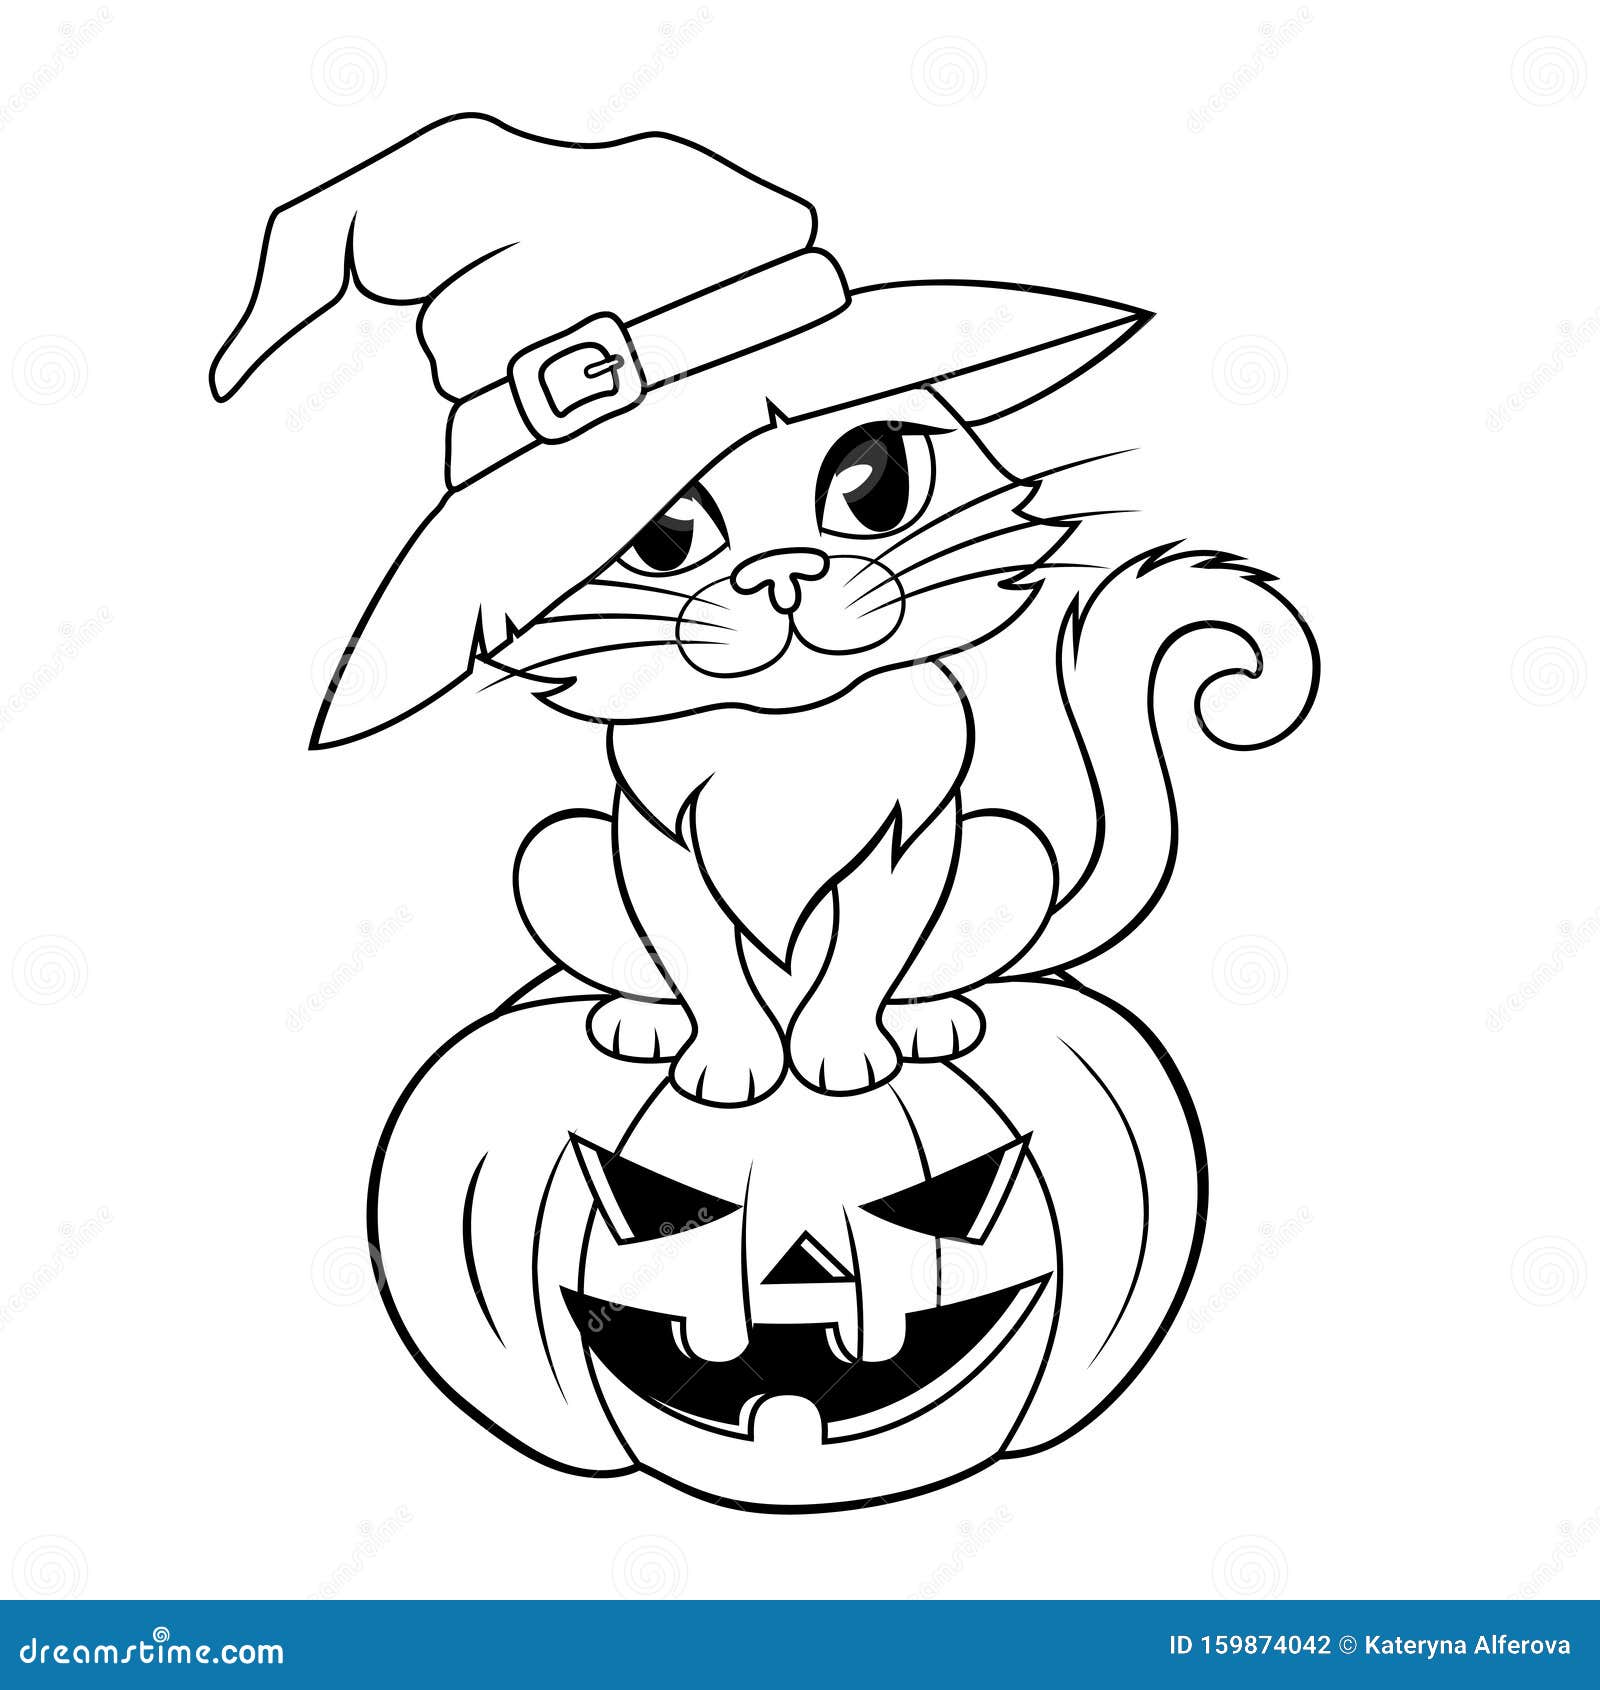 Halloween cat in a witch hat sitting on halloween pumpkin black and white illustration for coloring book stock vector